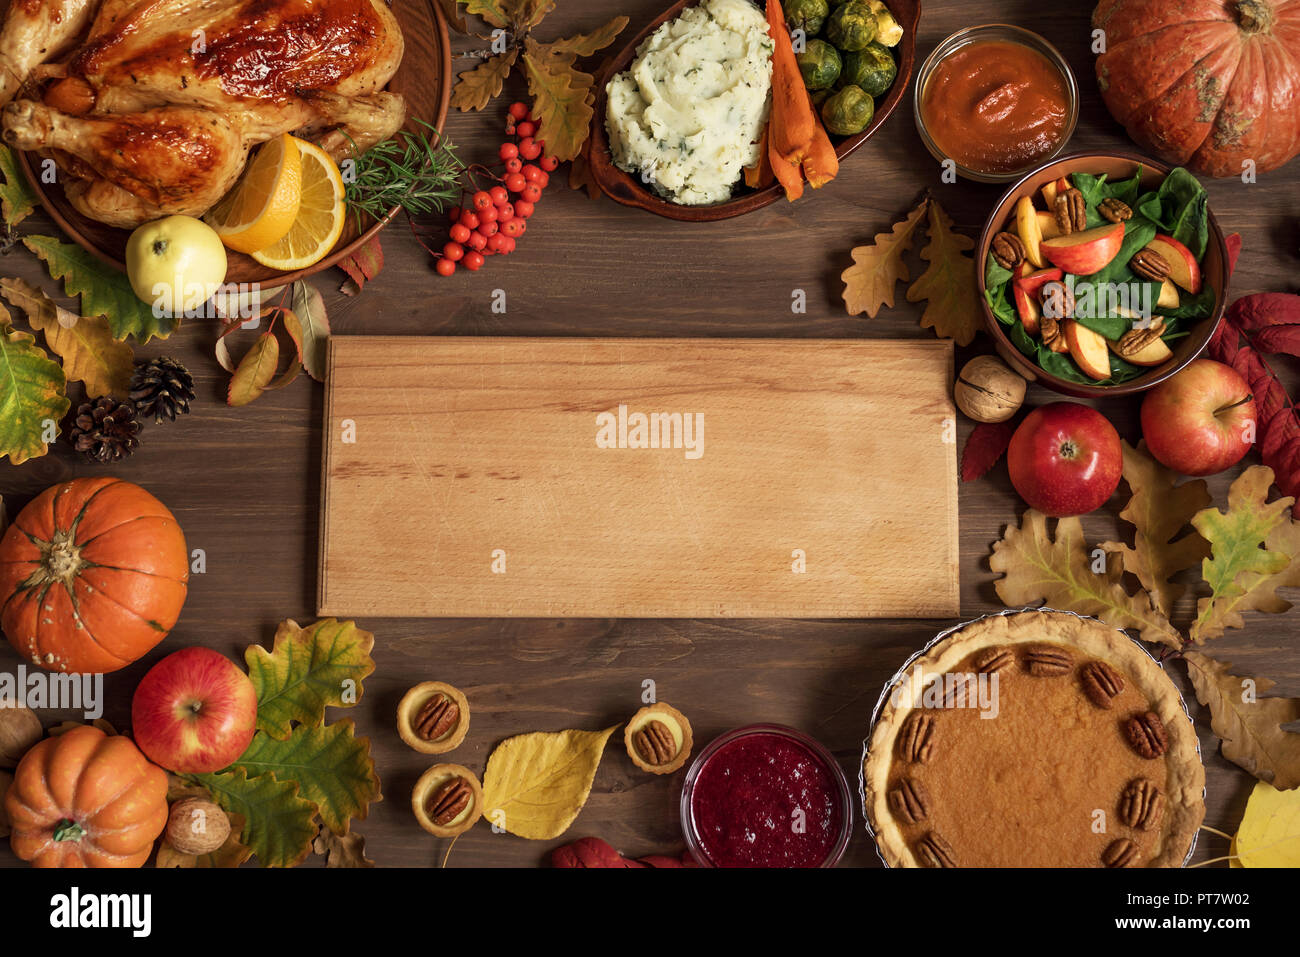 Autumn festive Thanksgiving dinner background with Turkey and traditional sides dishes around Wooden Board, copy space for text, menu design, seasonal Stock Photo